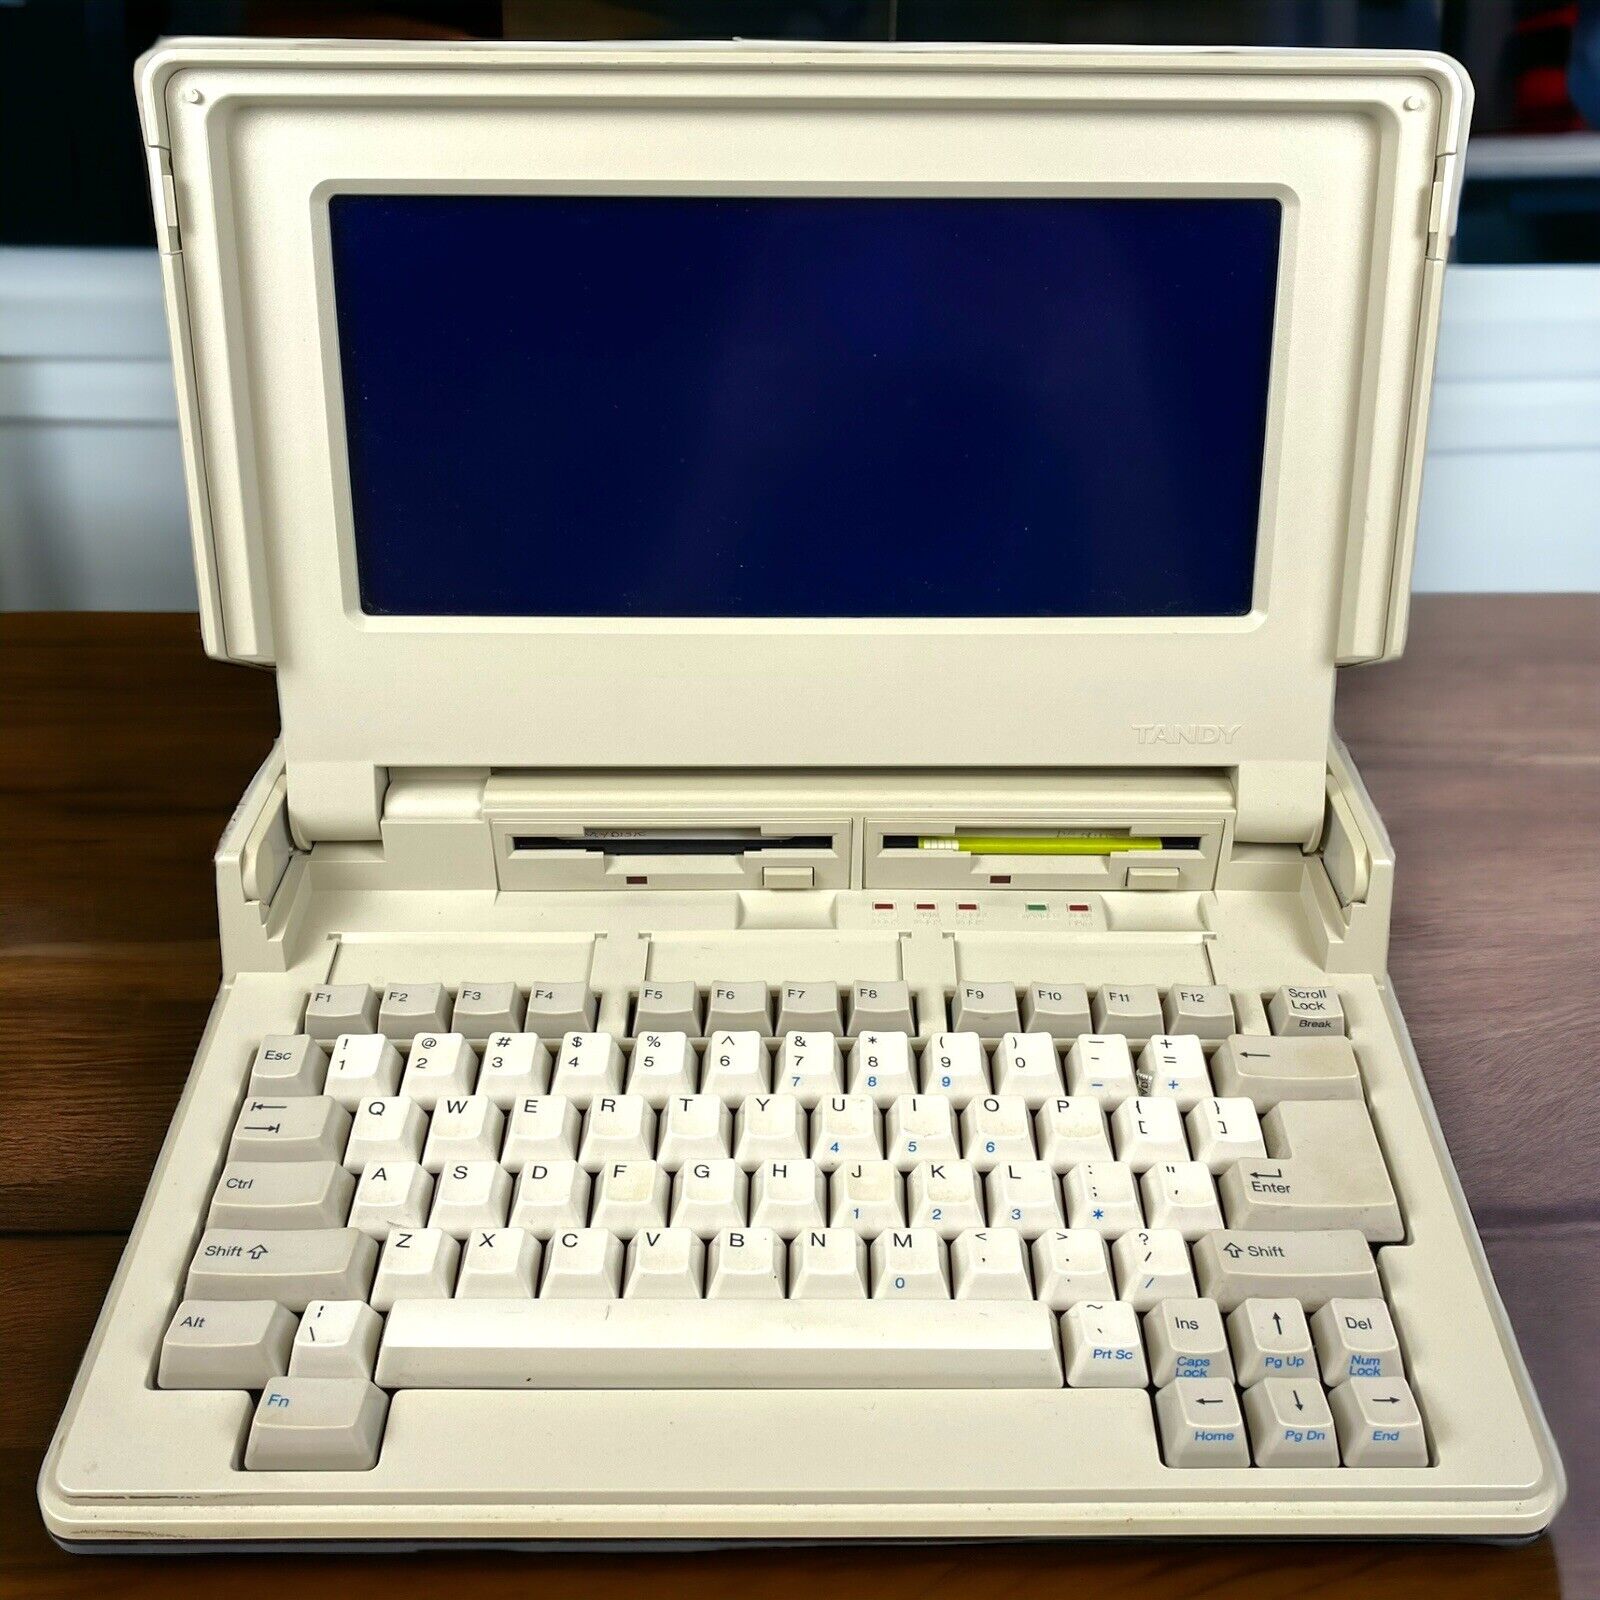 Tandy 1400LT Personal Computer (UNTESTED, NO POWER CORD, AS IS)